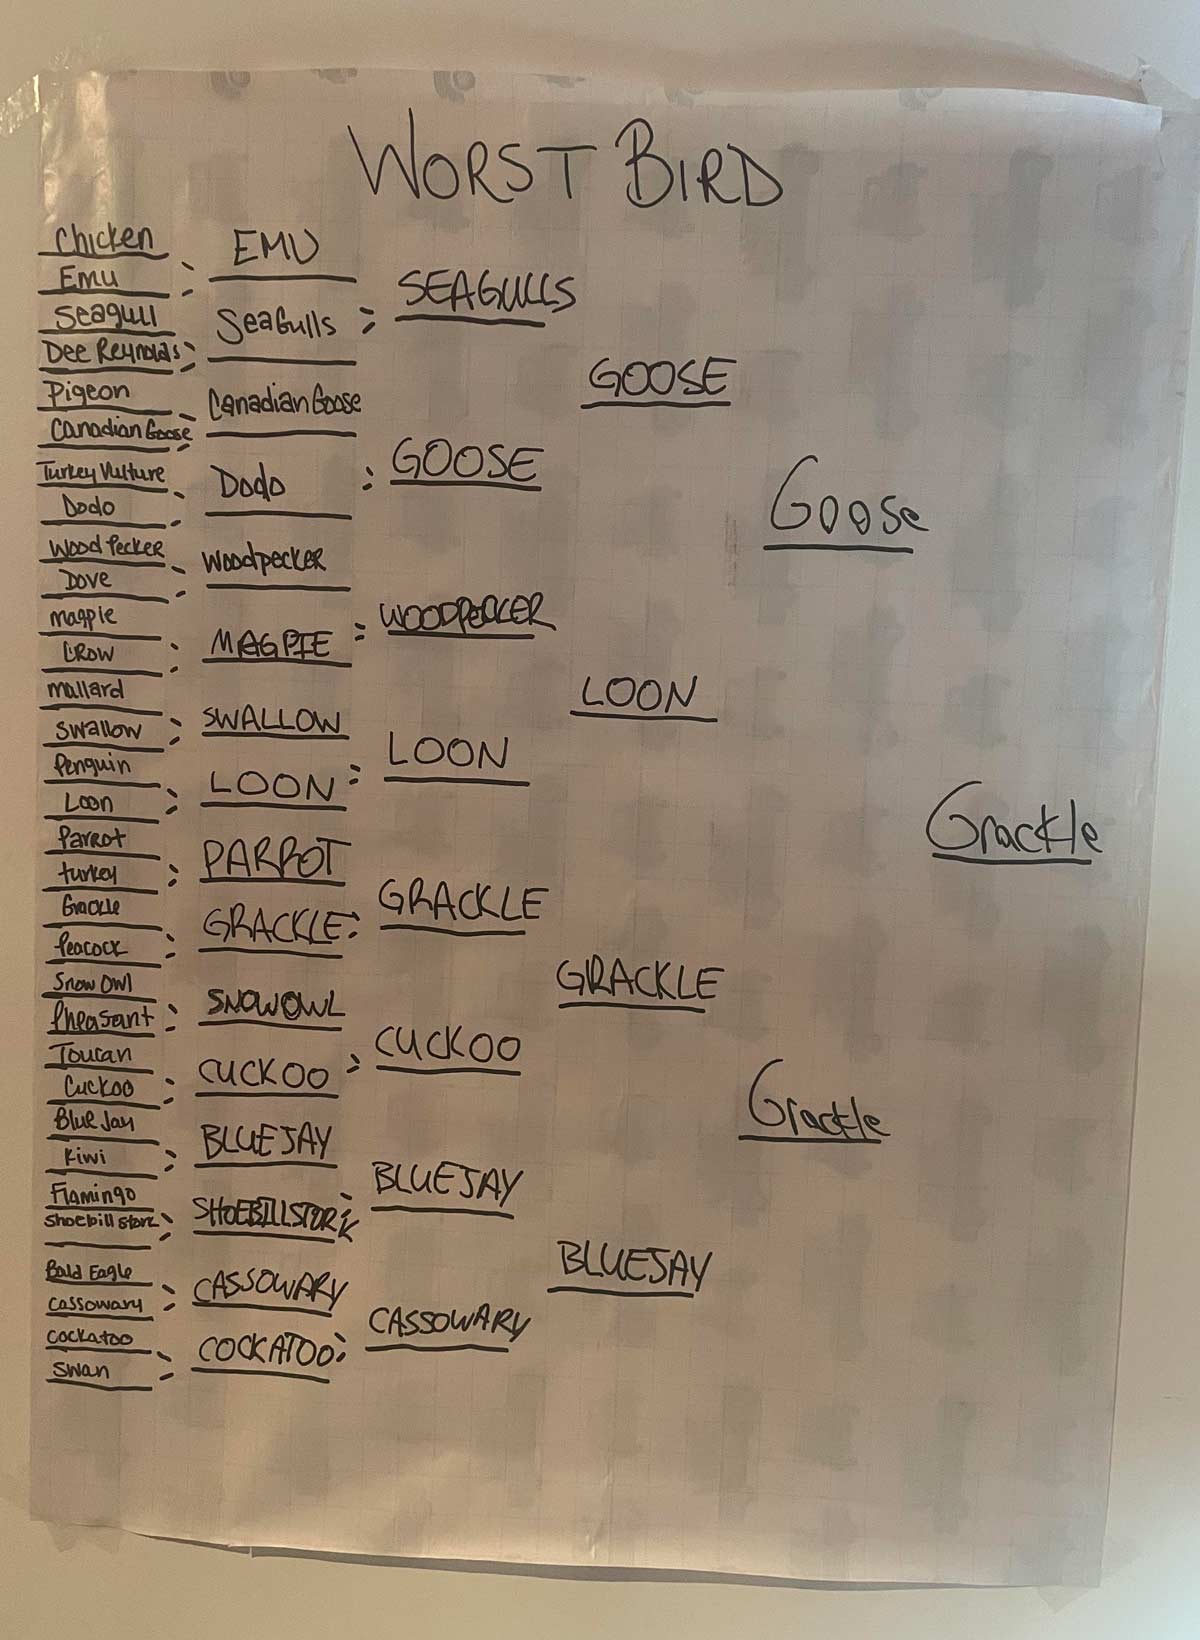 My family does brackets for holidays, this was our Christmas bracket